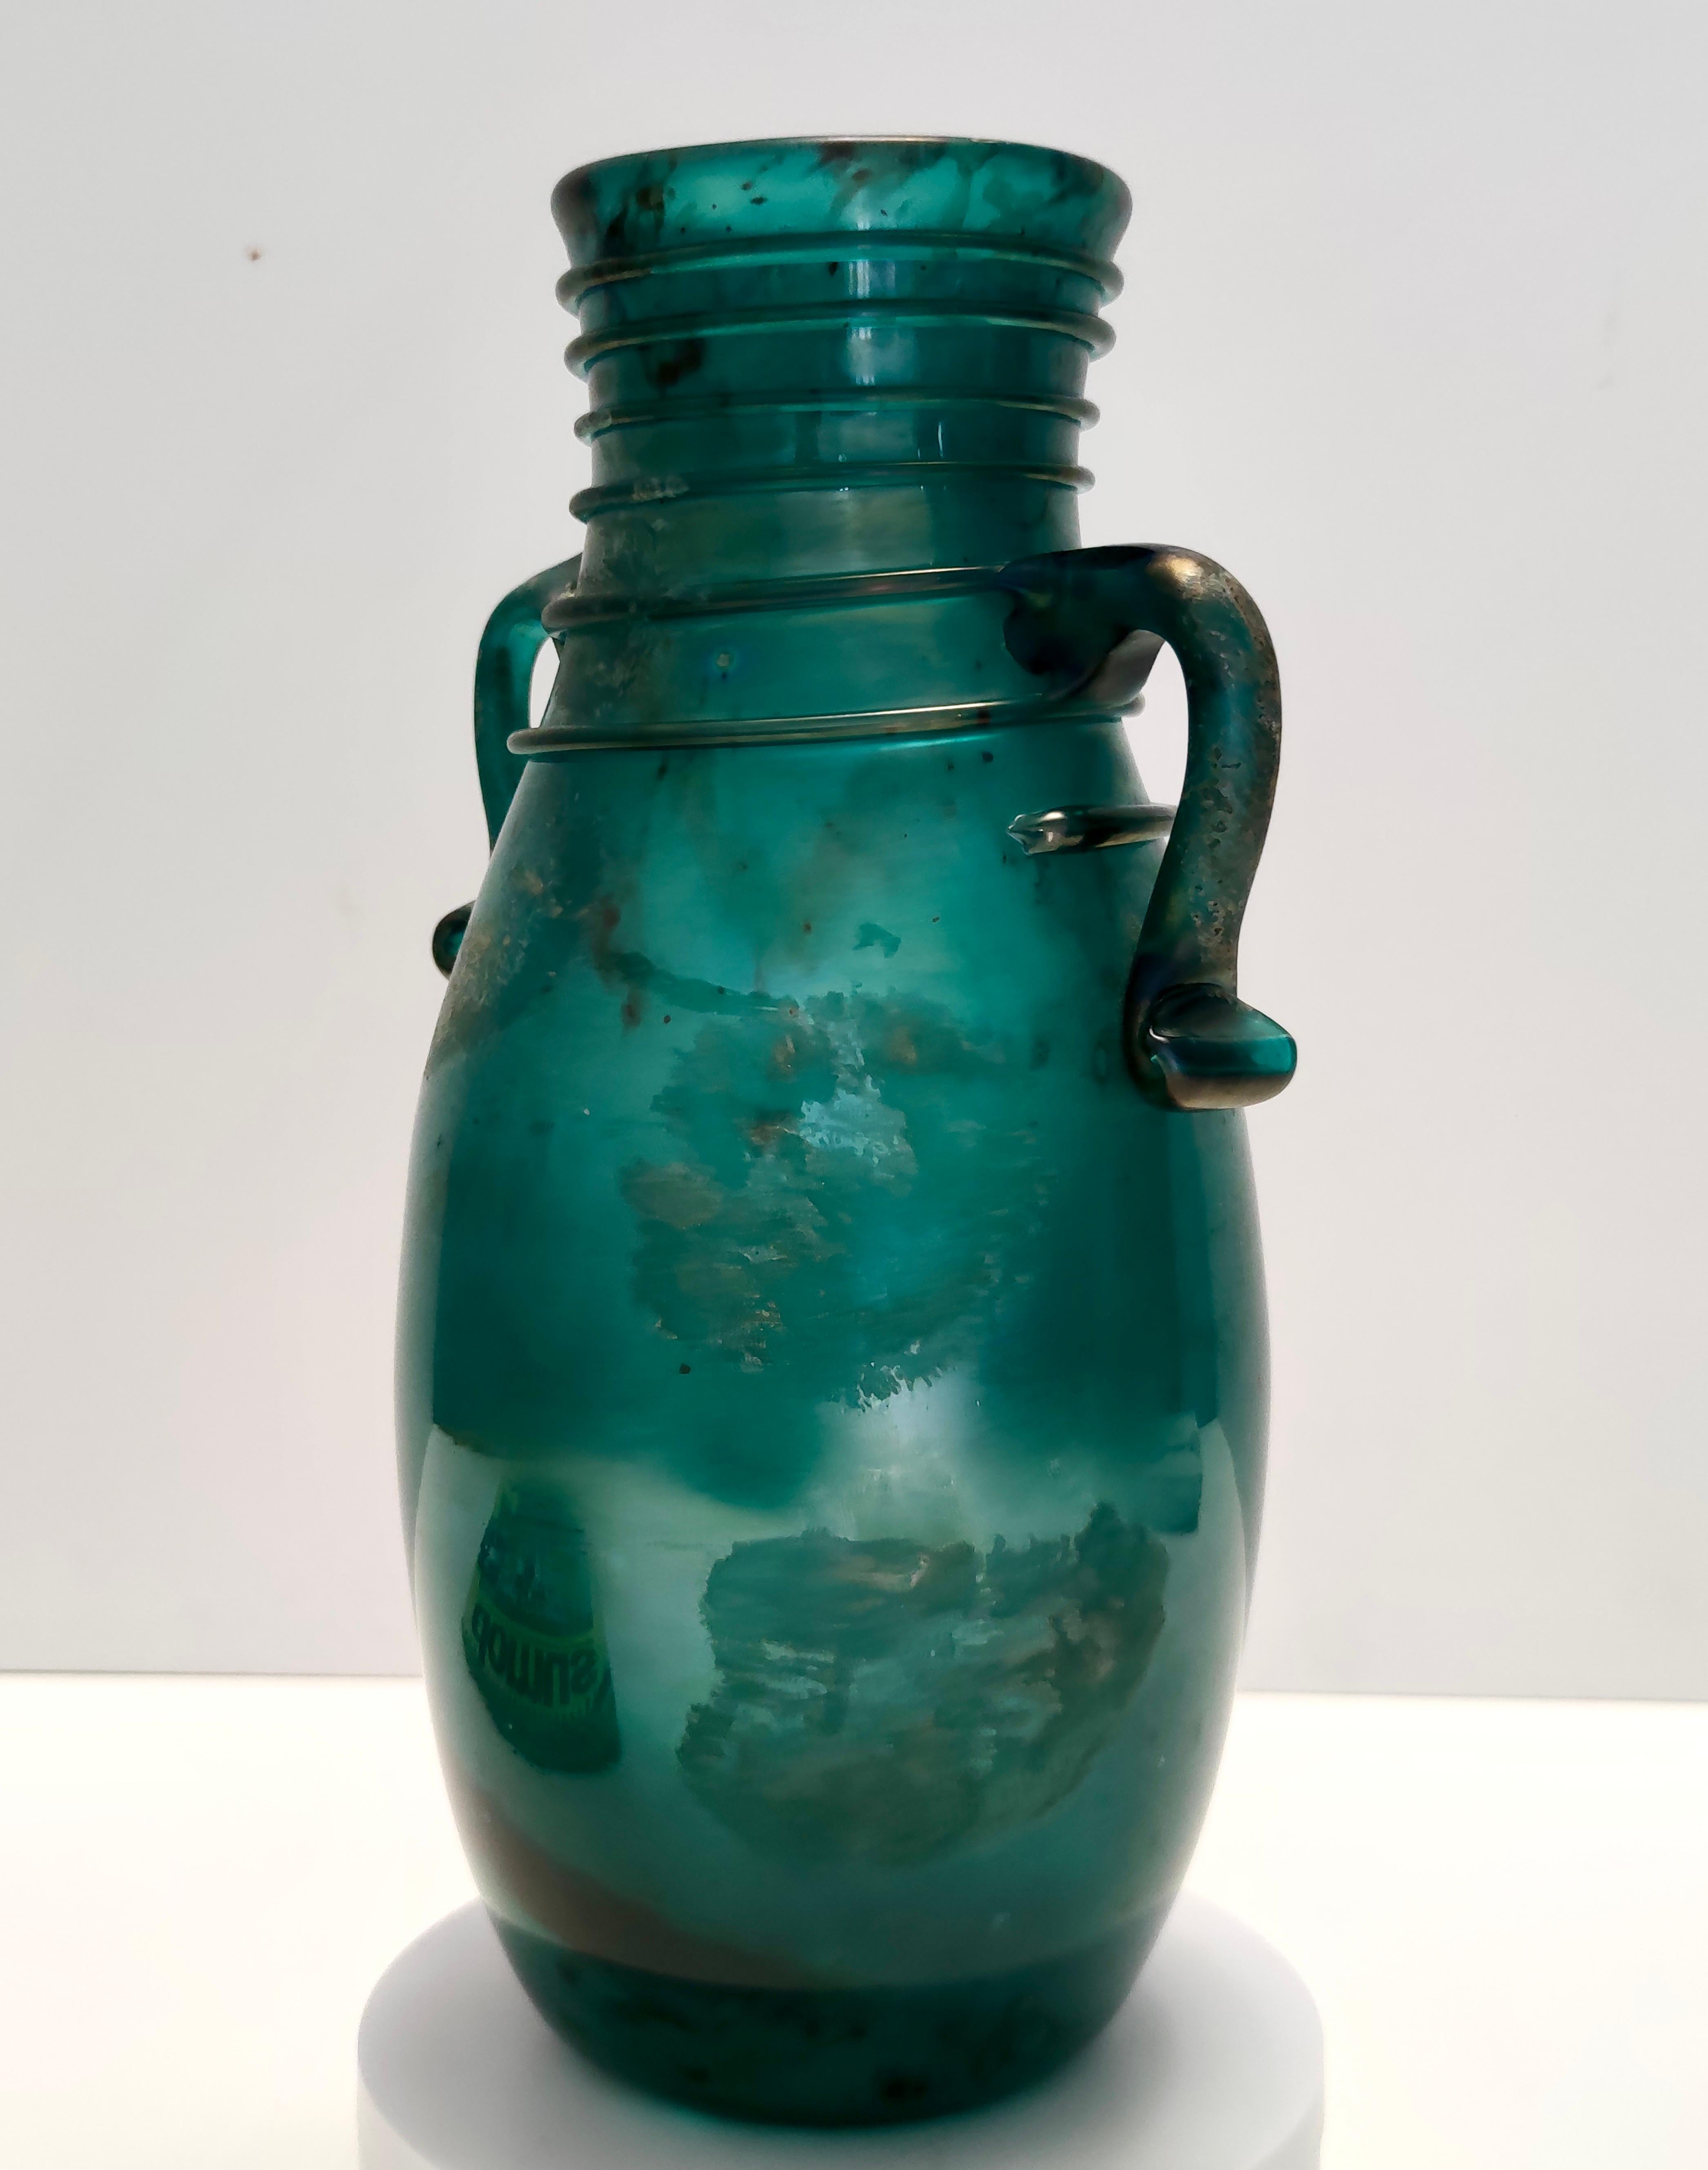 Vintage Teal Scavo Glass Vase Ascribable to Seguso, Archeological style, Italy In Excellent Condition For Sale In Bresso, Lombardy